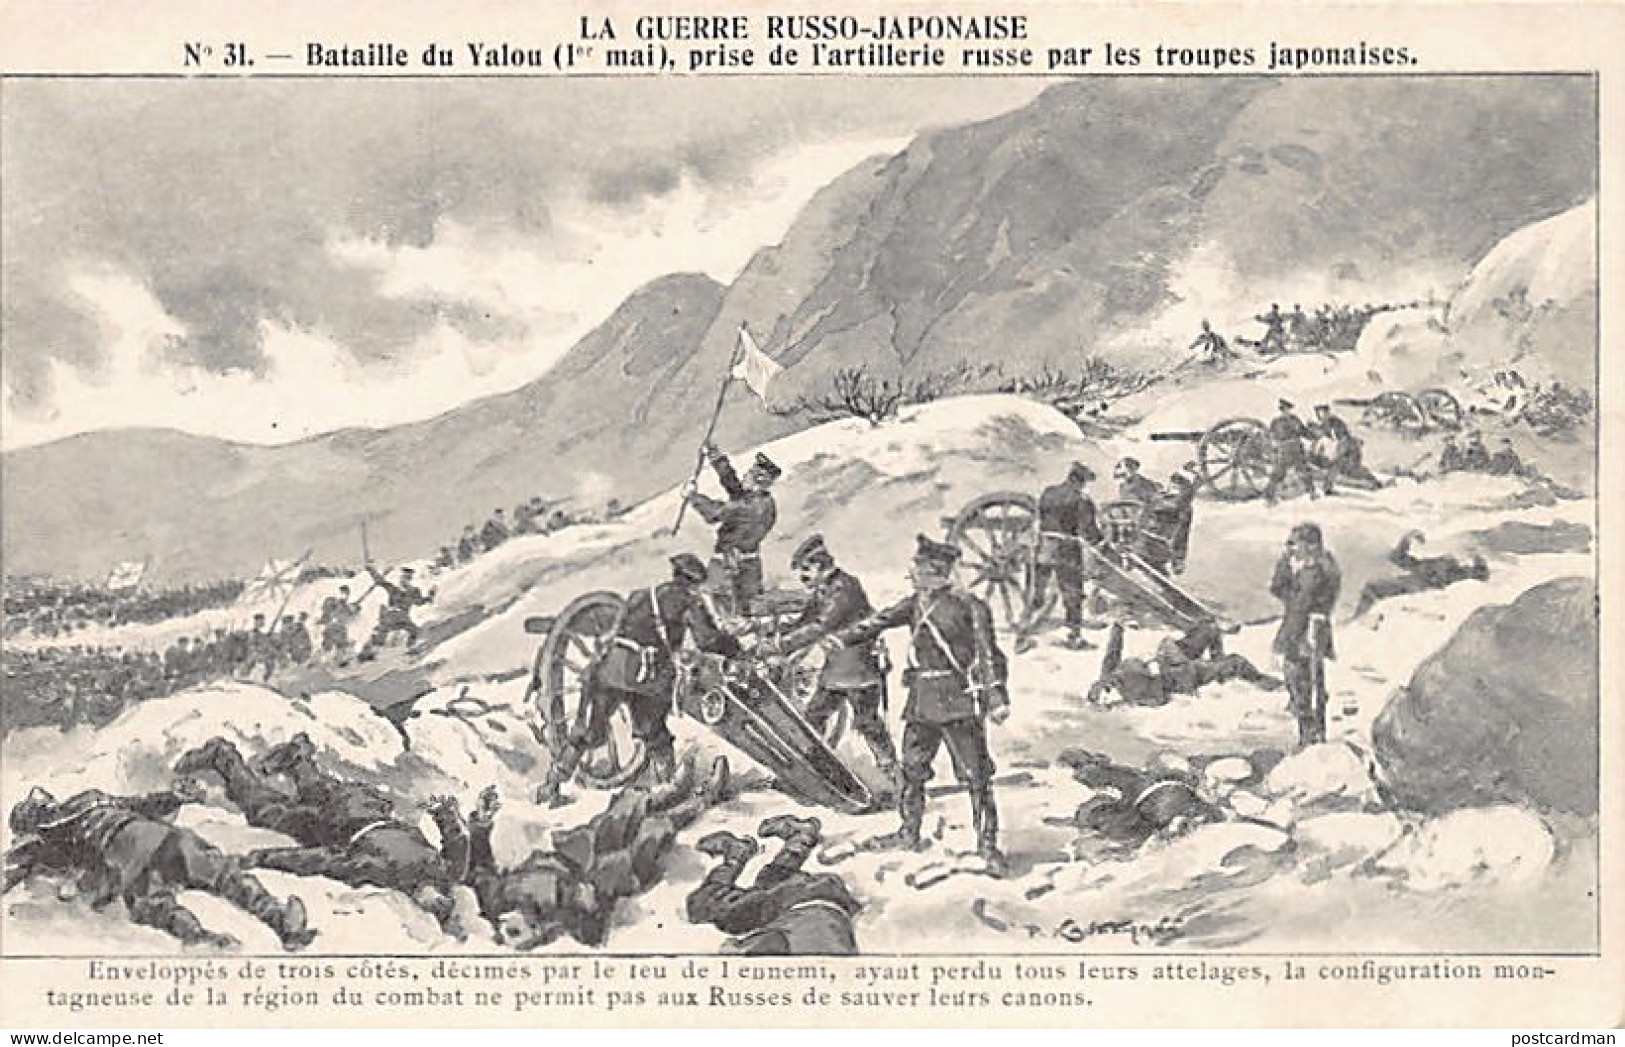 Korea - RUSSO JAPANESE WAR - Battle Of The Yalu River On May 1, 1904 - Capture Of Russian Artillery Pieces By Japanese T - Korea, North